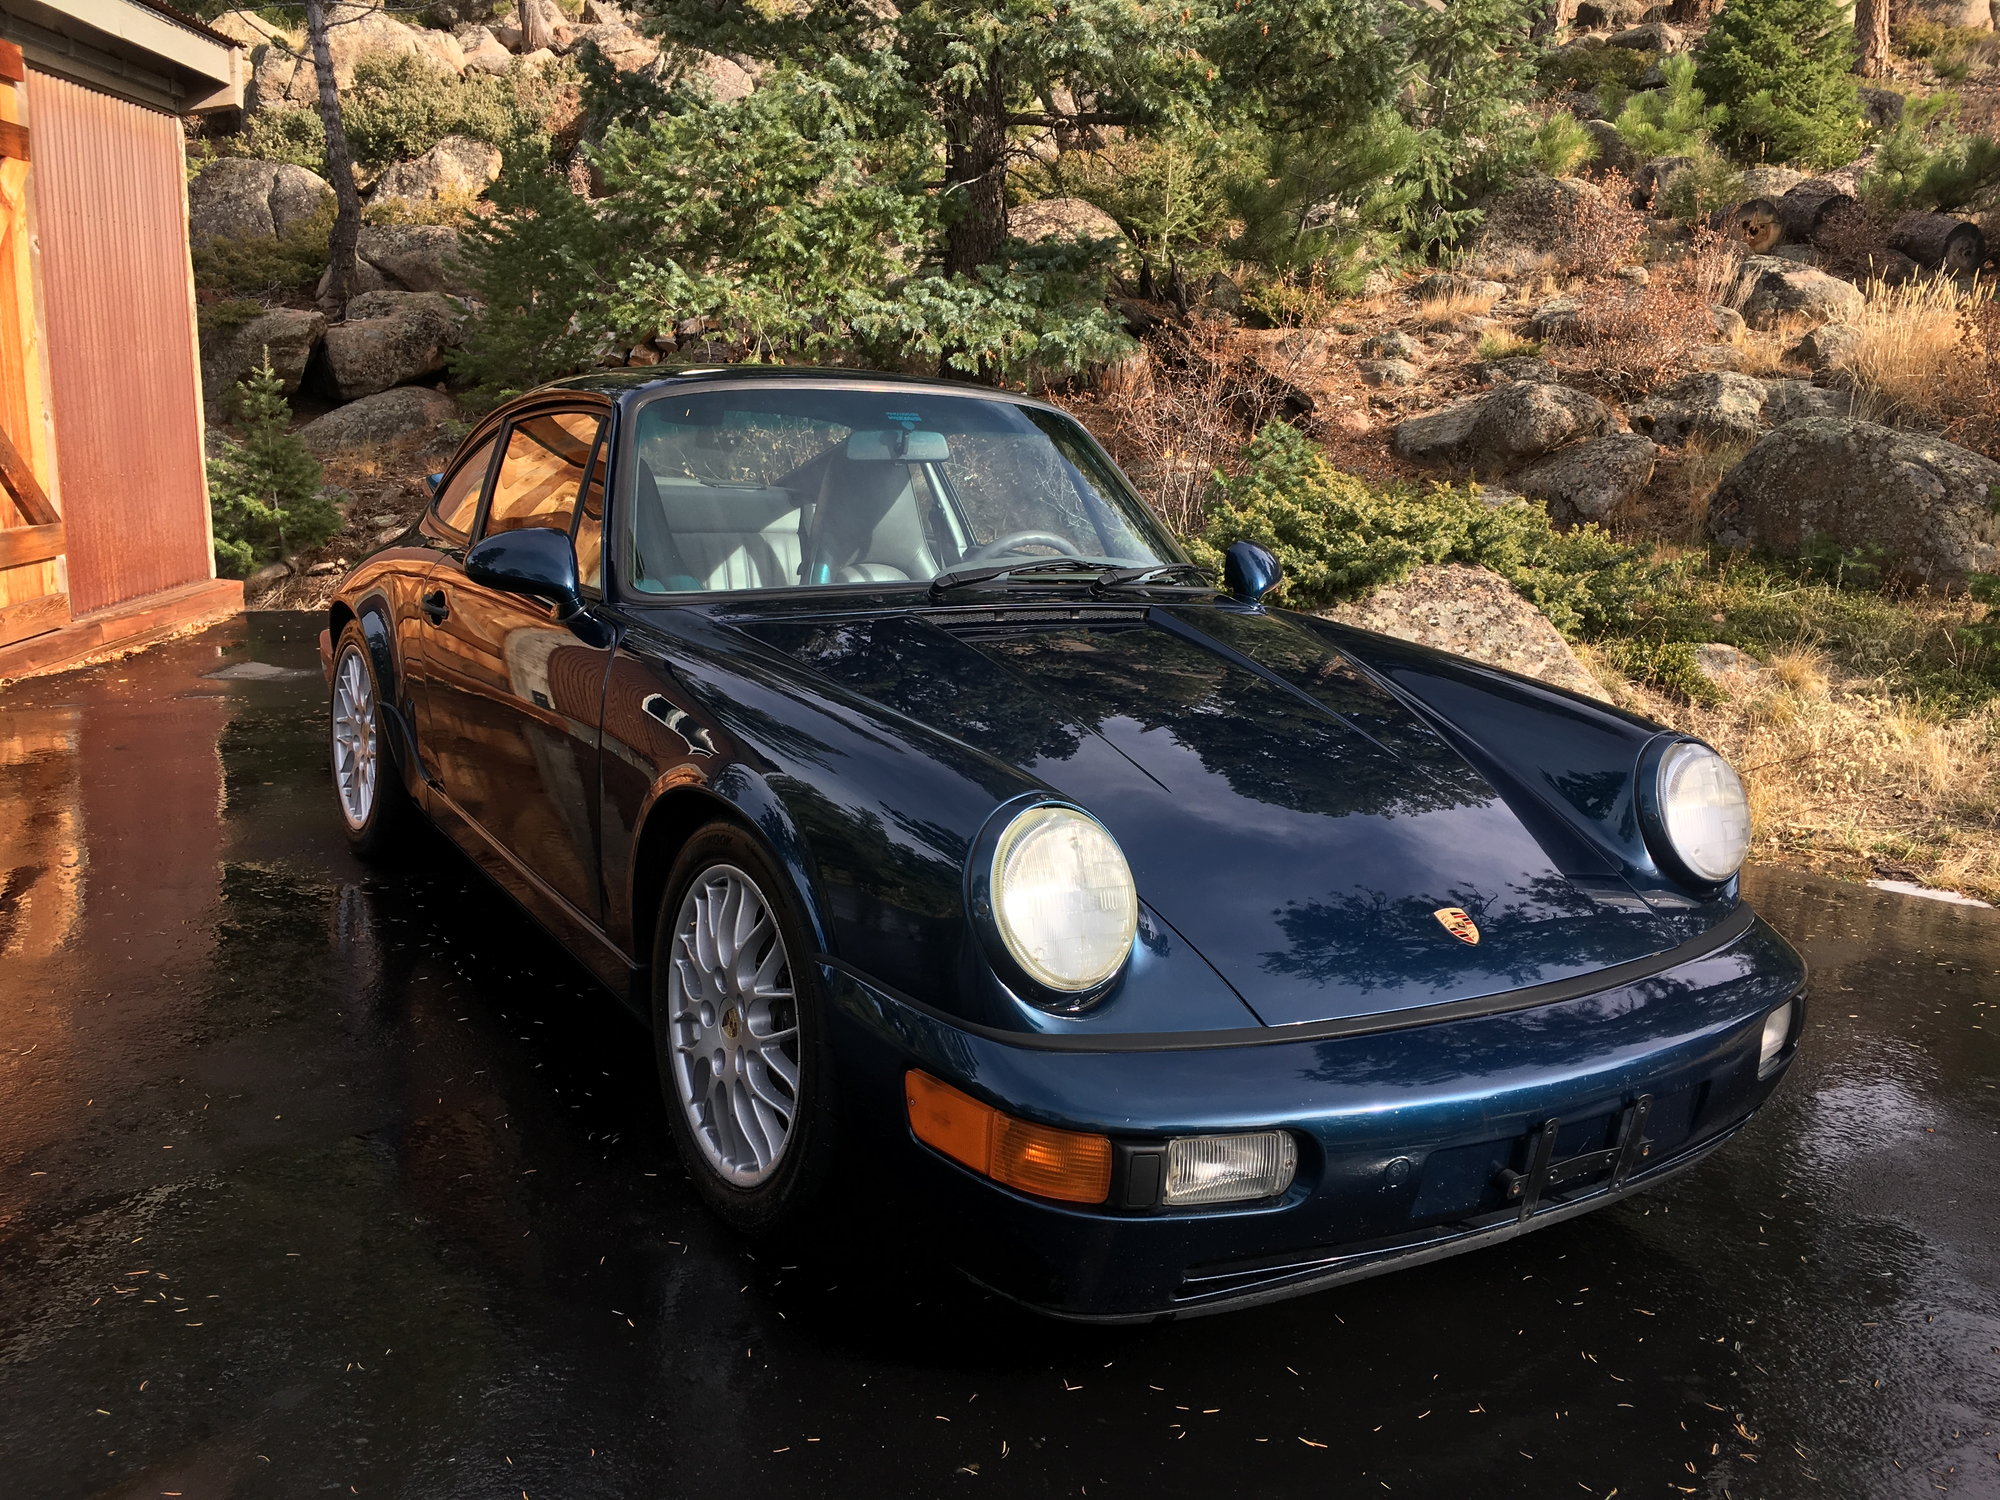 1993 Porsche 911 - 1993 Porsche Carrera 4 Coupe - Gorgeous Amazon Green and Well Maintained - Used - VIN WP0AB2963PS420142 - 124,500 Miles - 6 cyl - AWD - Manual - Coupe - Other - Evergreen, CO 80439, United States